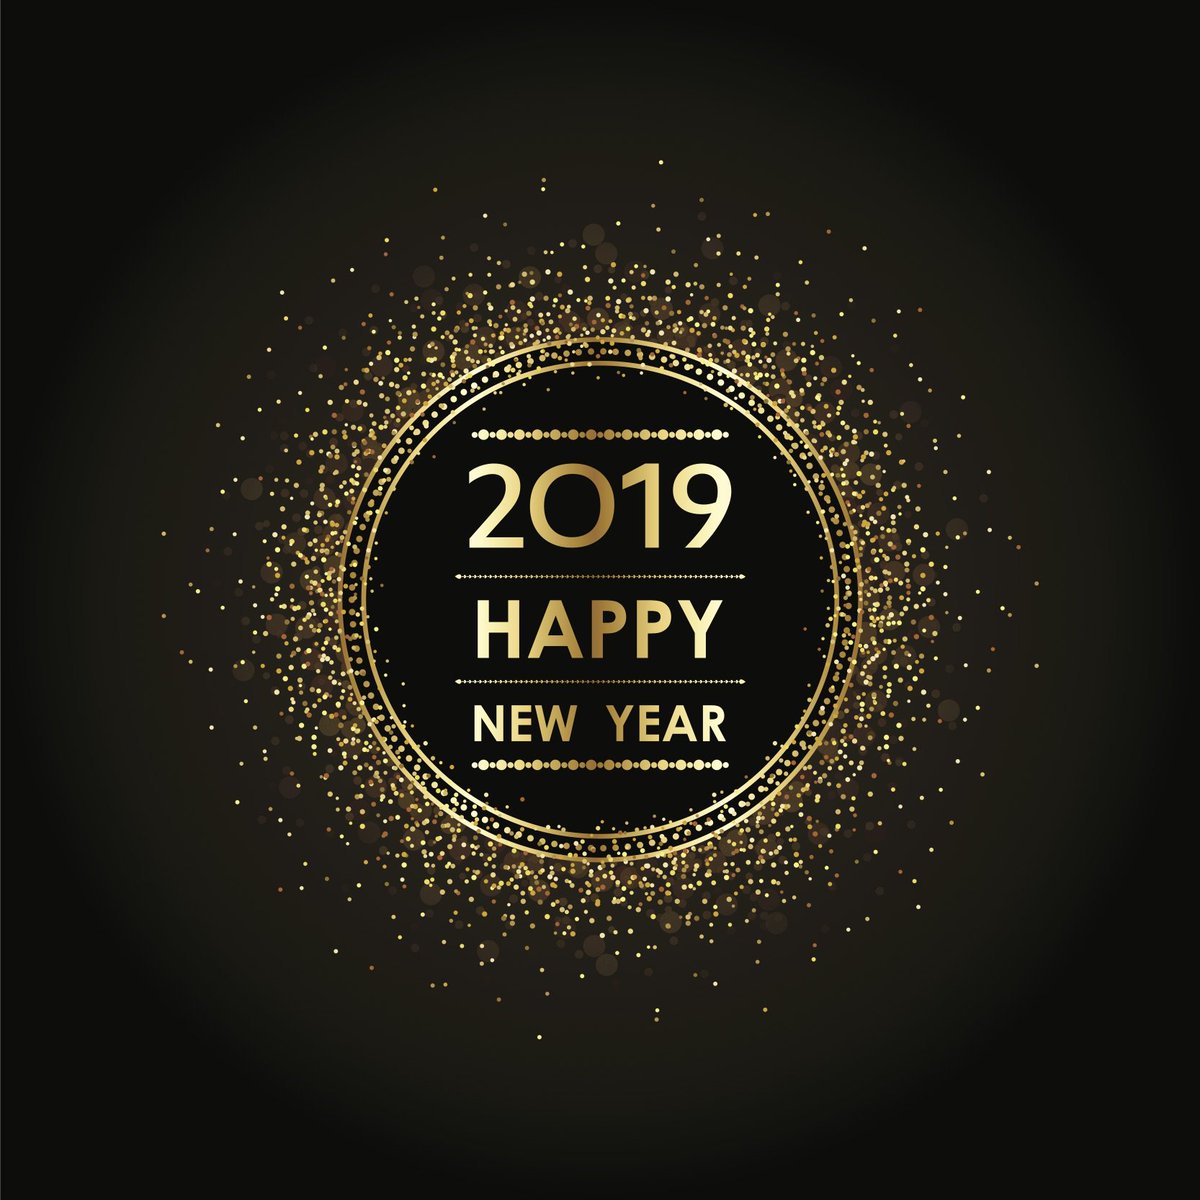 A very Happy New Year to you all from the team at Schmidt Bristol #2019